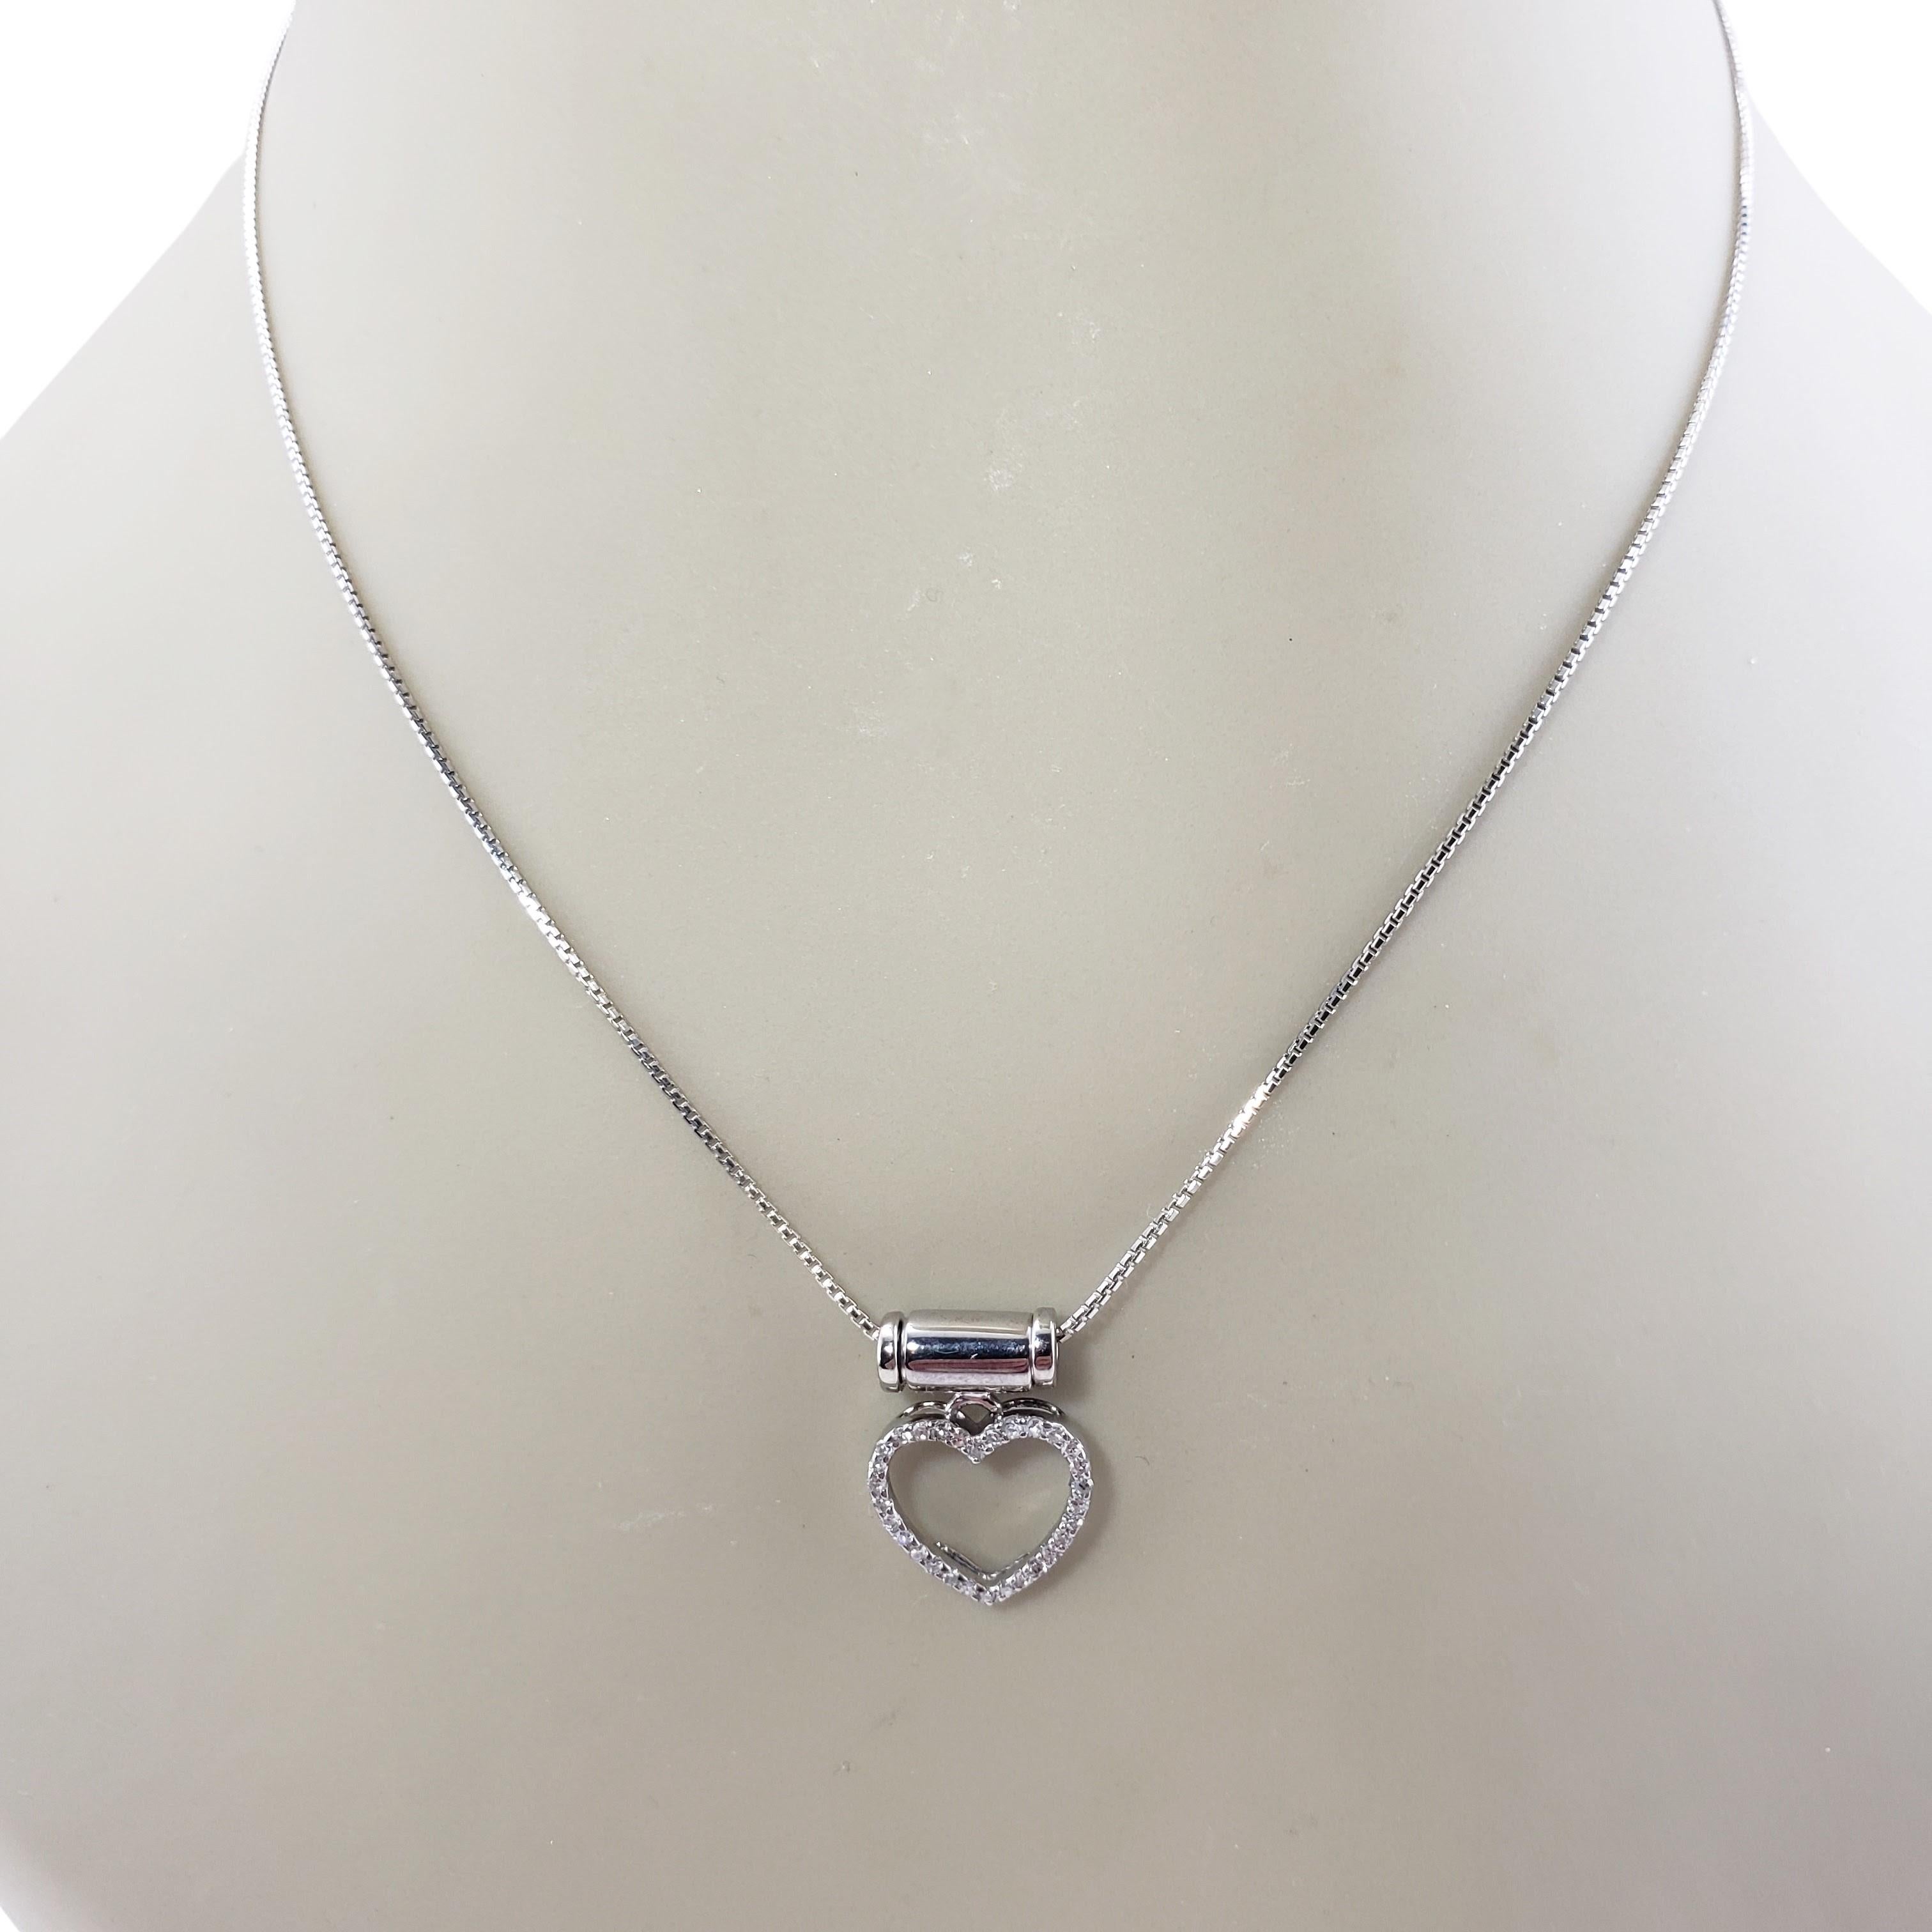 Vintage 14 Karat White Gold Diamond Heart Pendant Necklace-

This sparkling heart pendant necklace features 30 round single cut diamonds set in elegant 14K white gold. Suspends from a classic box chain.

Approximate total diamond weight: .15